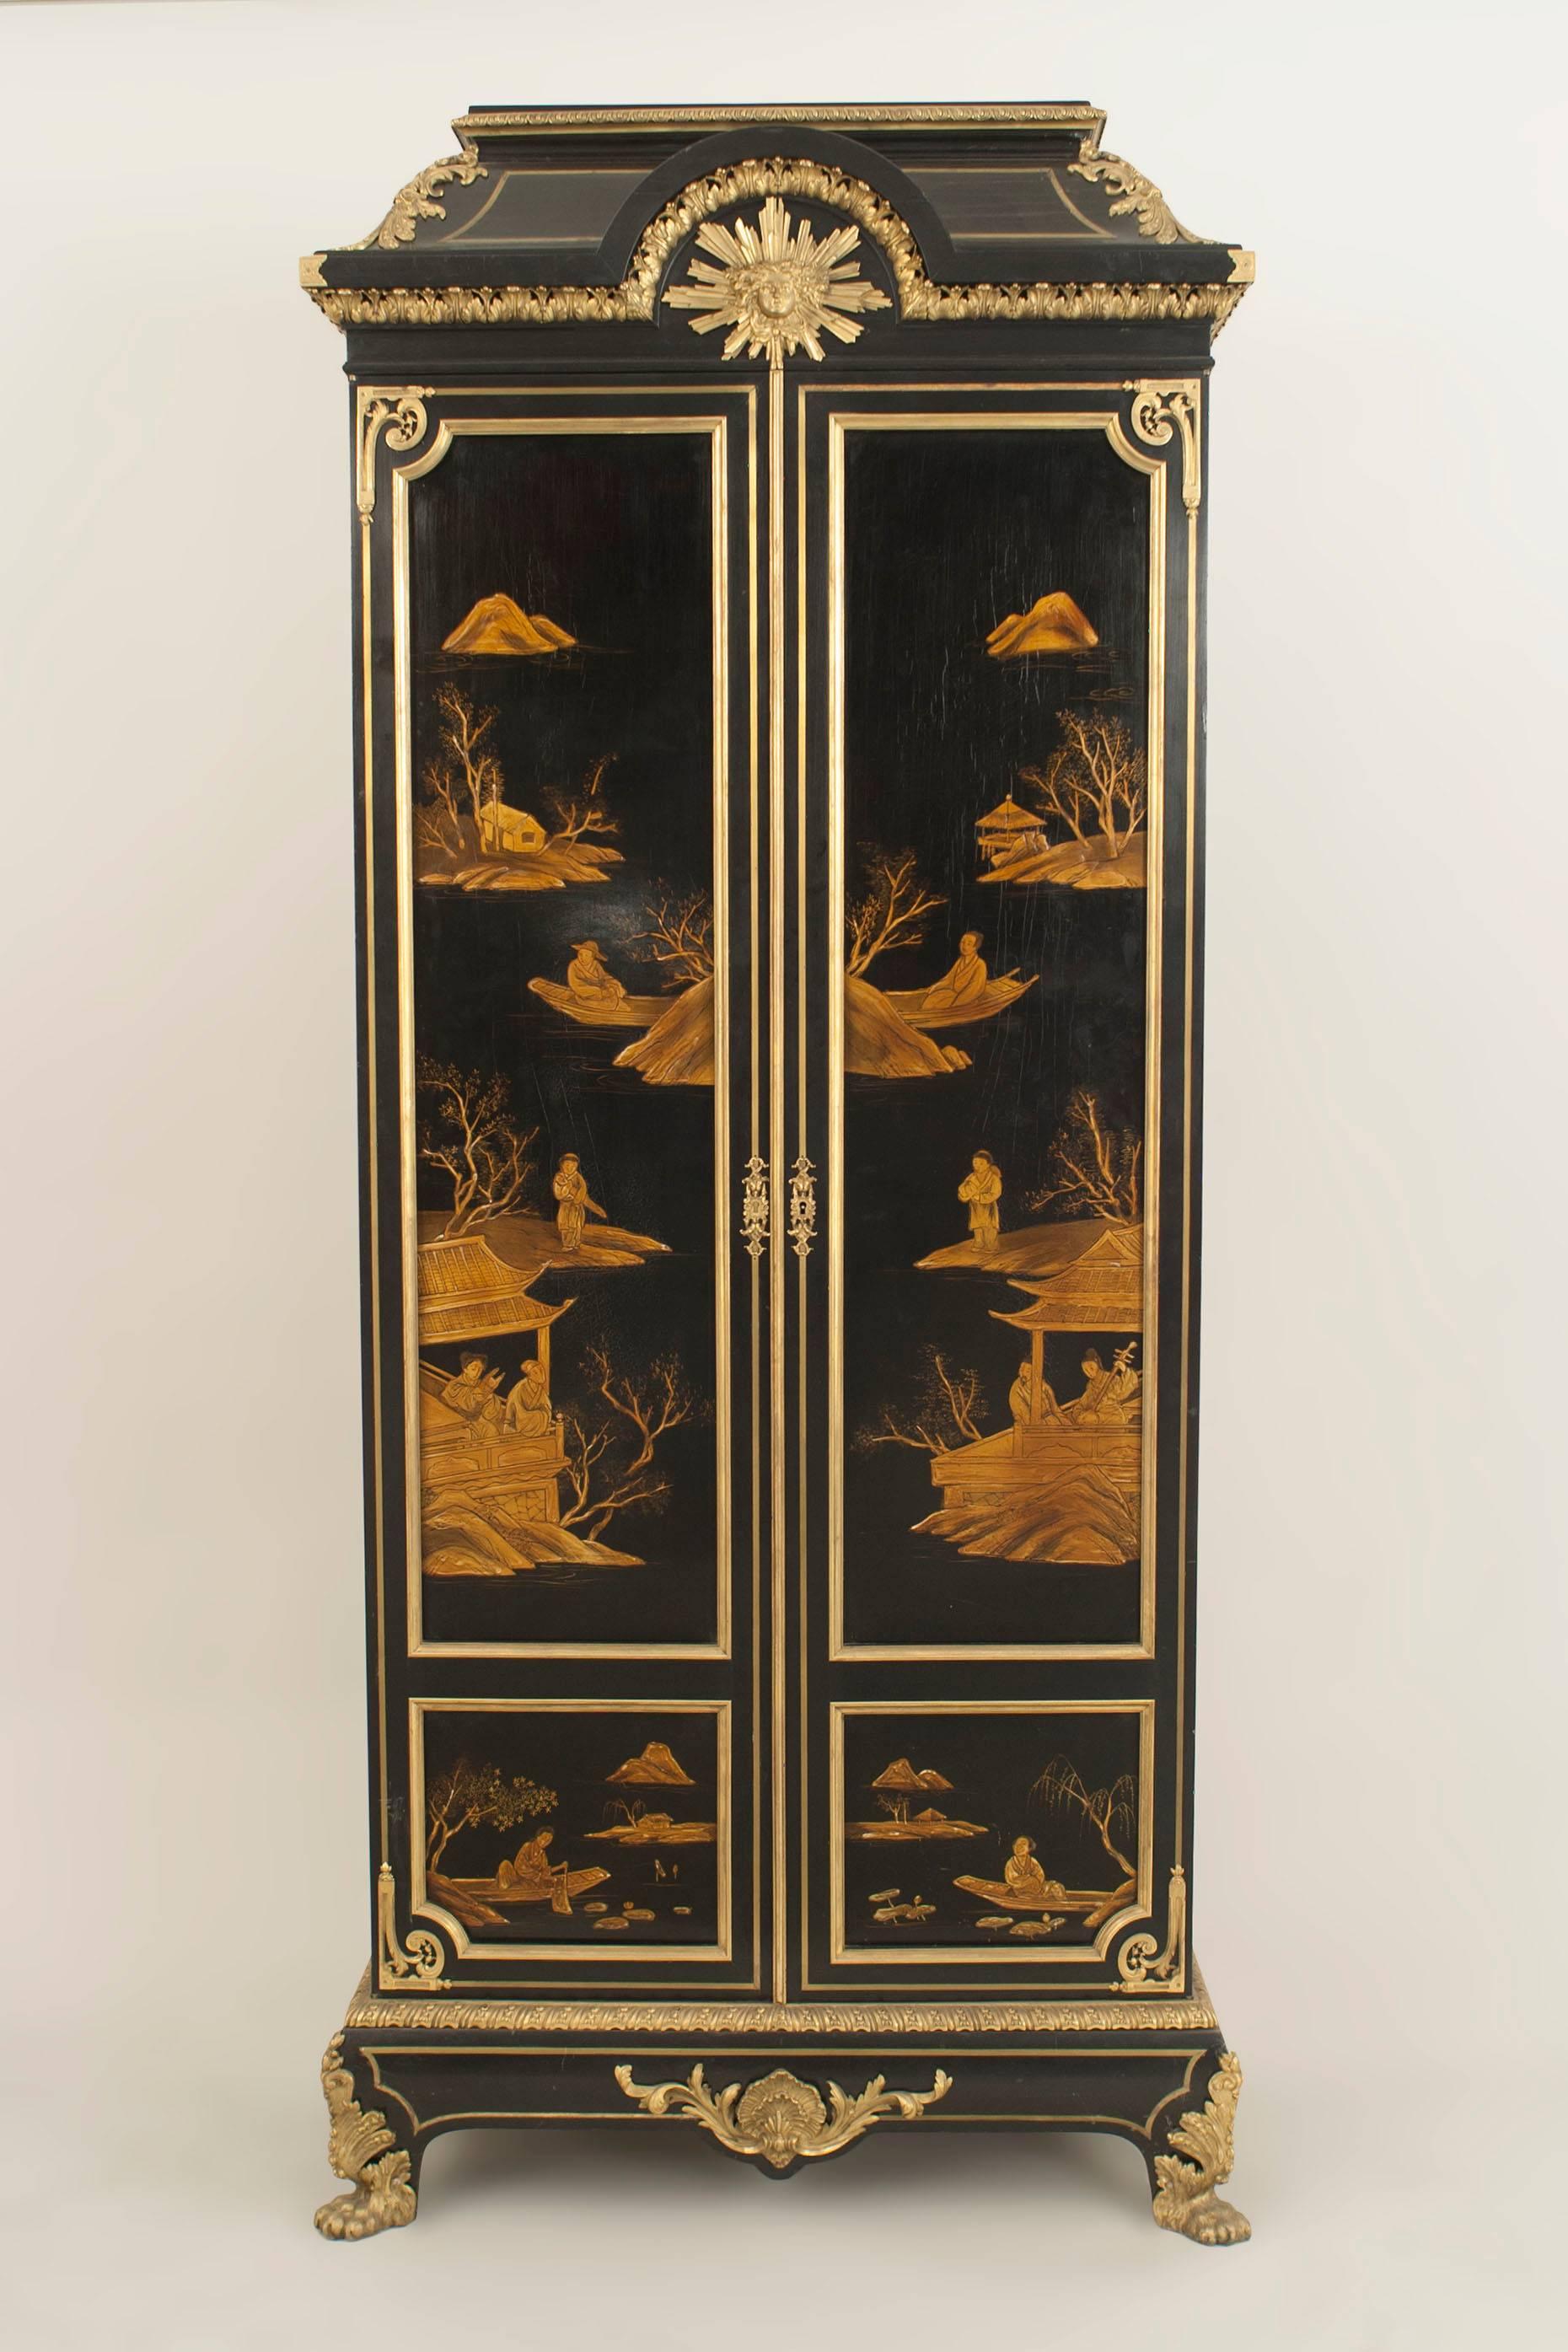 French Victorian (19/20th Century) 2 door black lacquered chinoiserie decorated armoire cabinet with bronze trim.
